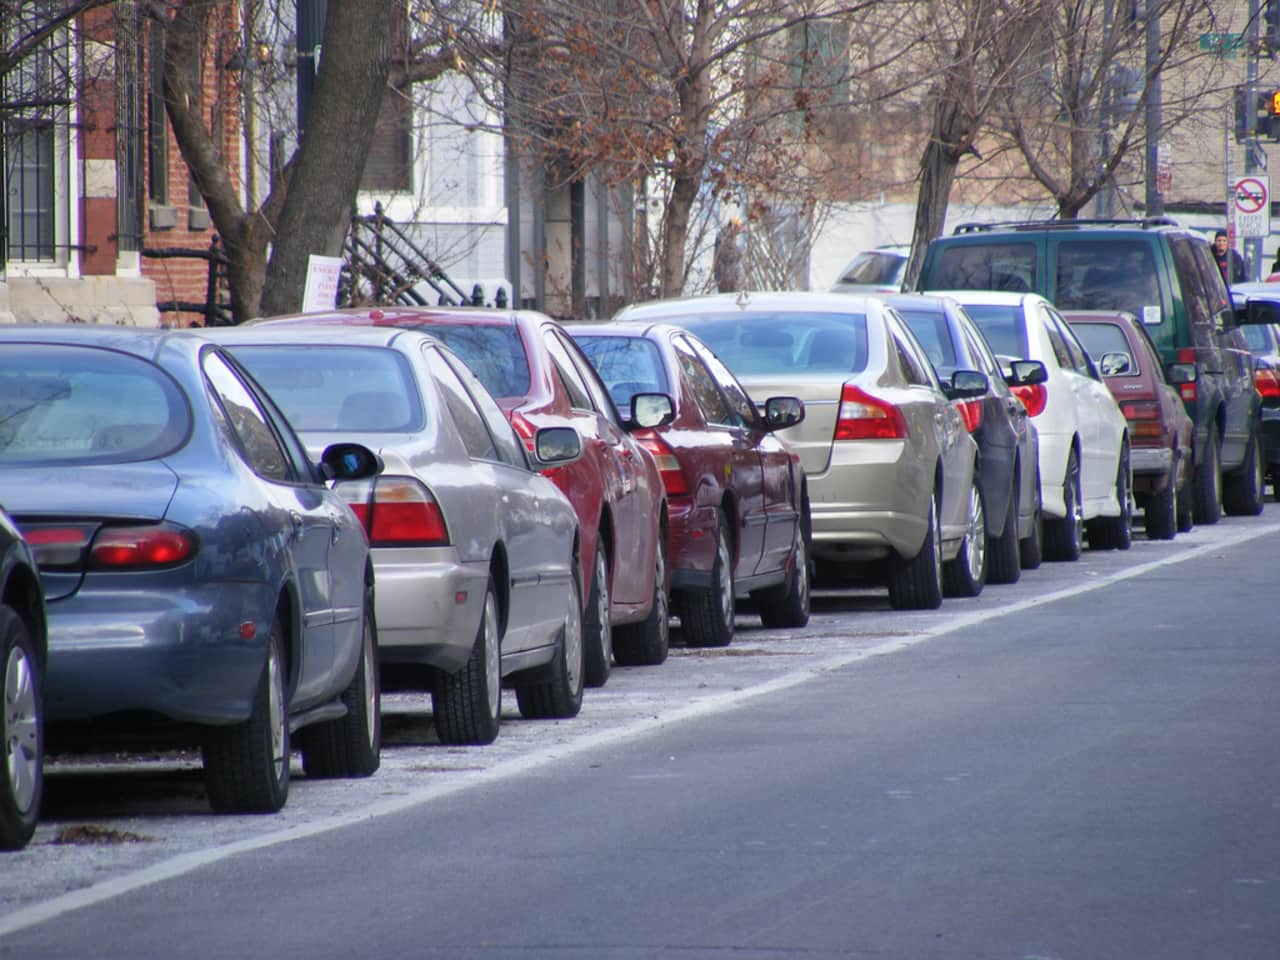 Bergenfield has altered overnight on-street parking laws.